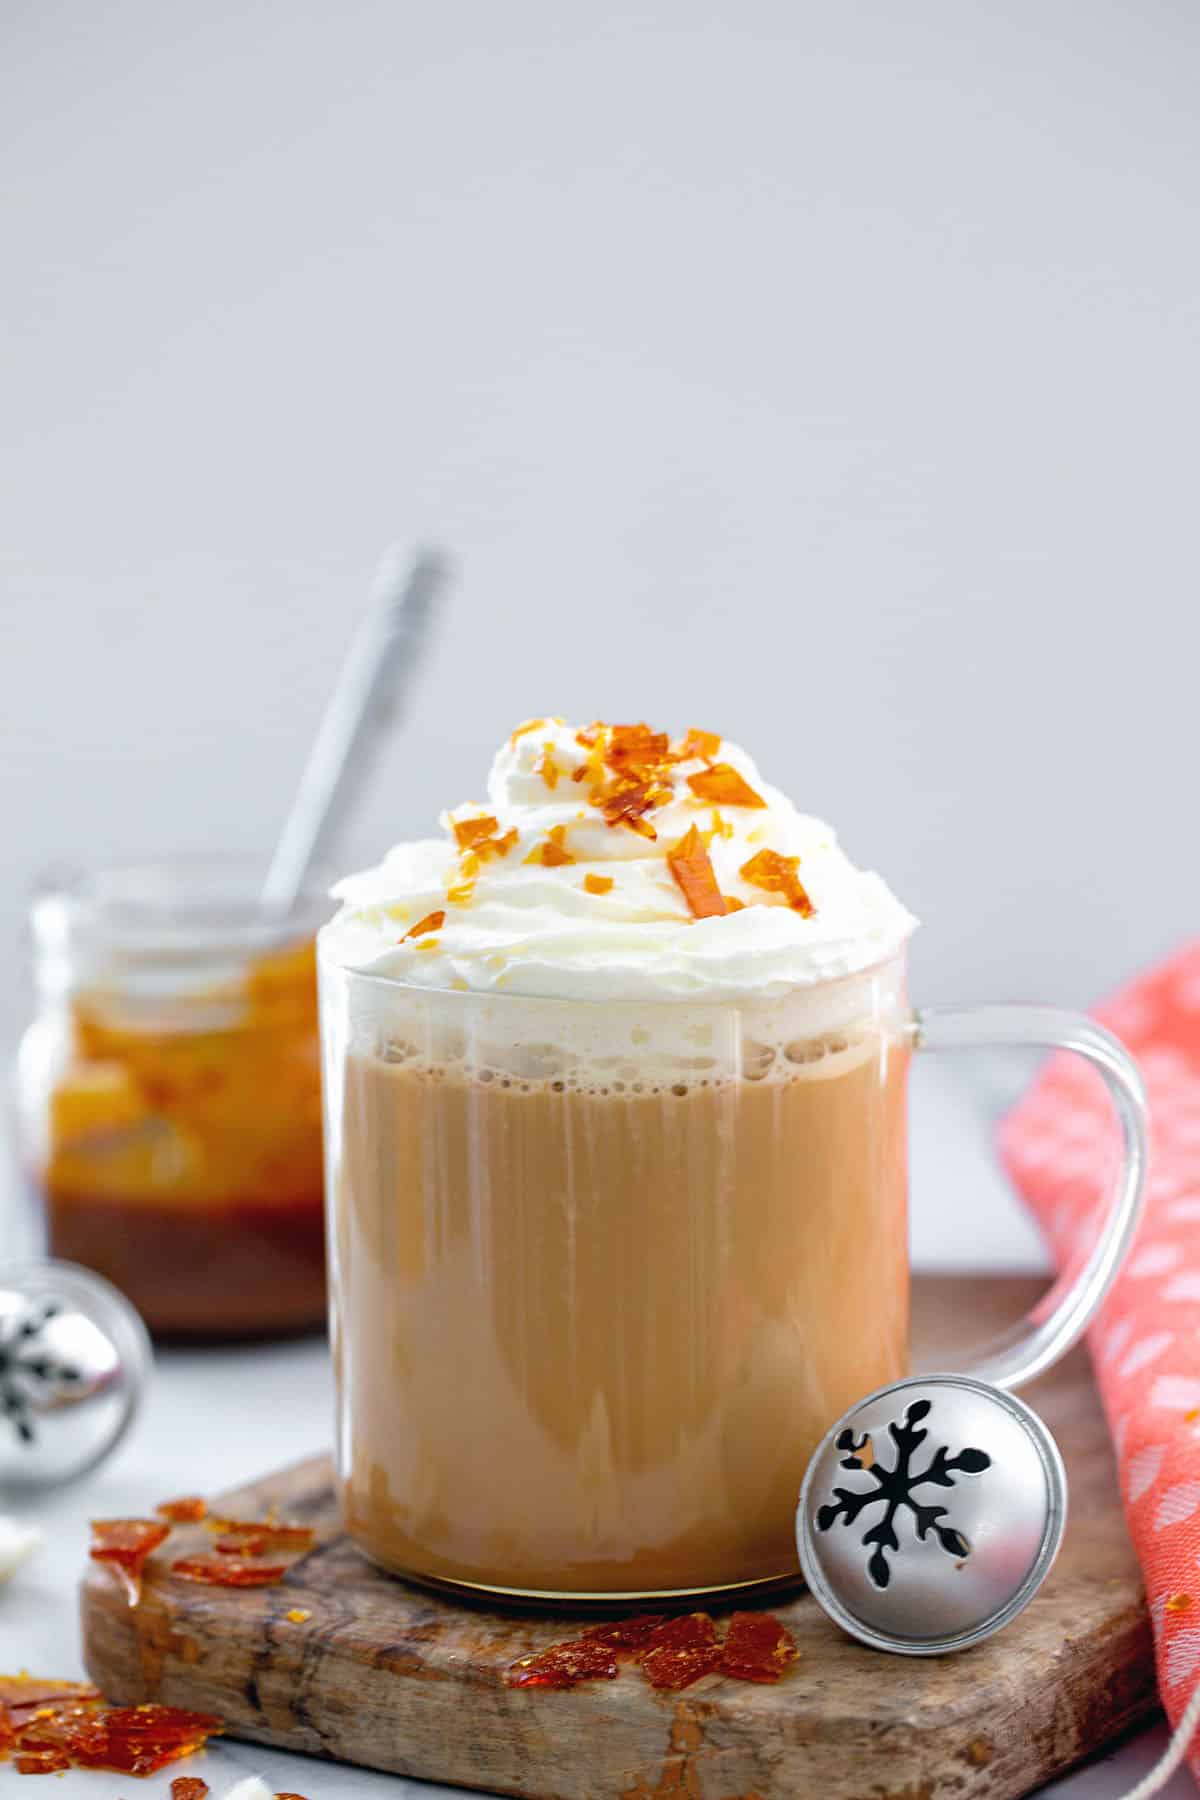 Head-on view of a Caramel Brulée Latte in a clear glass mug with caramel pieces and silver bell.